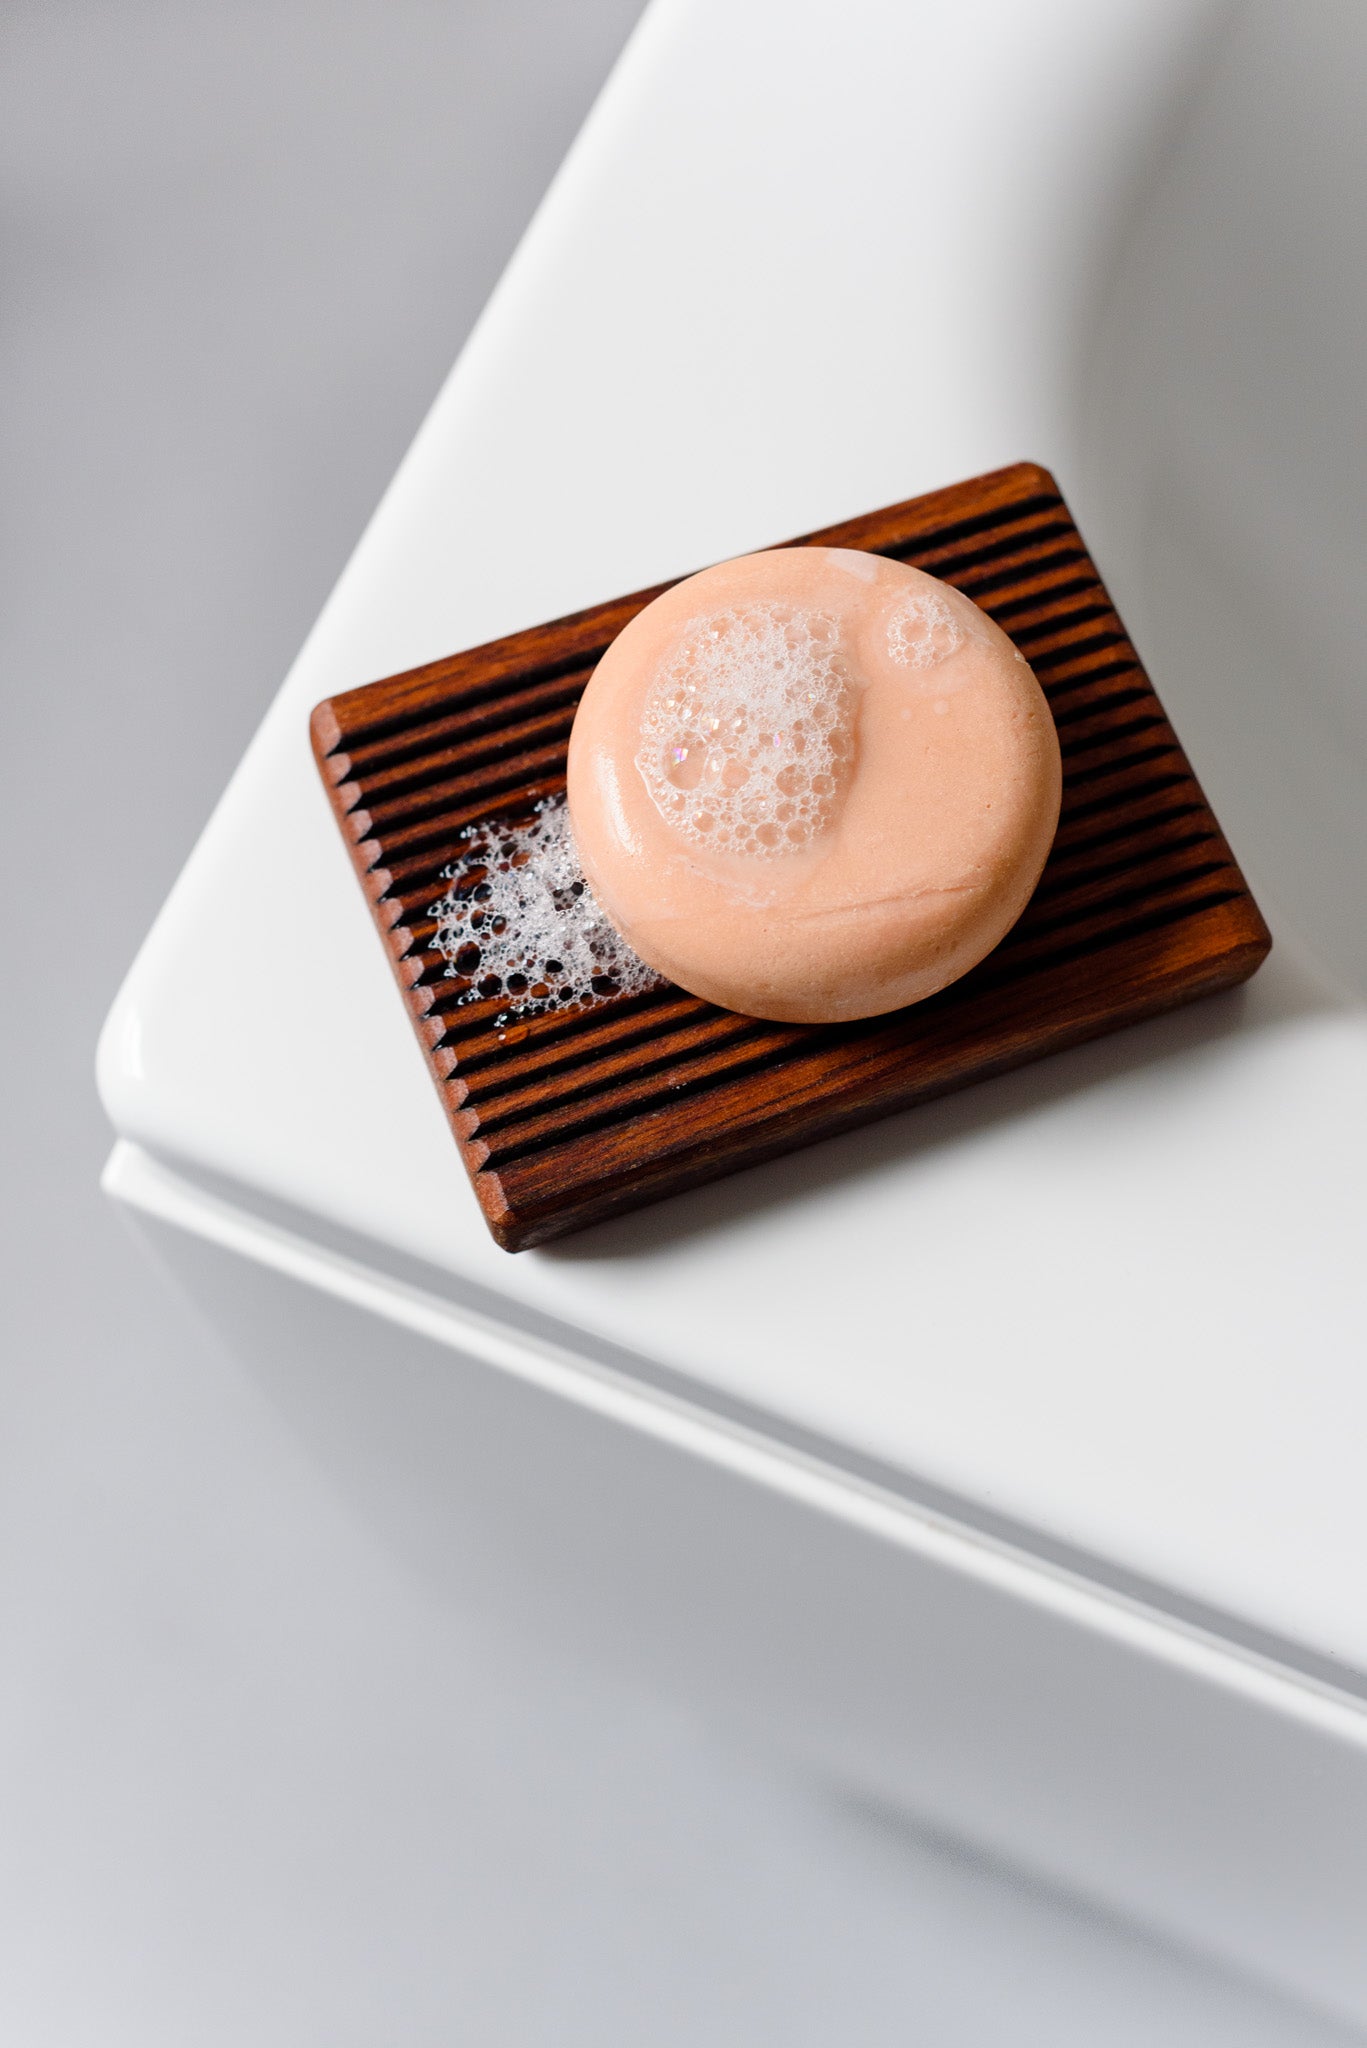 The round pink shampoo bar, foamy and bubbly, placed on a wooden soap tray, resting on a white shelf.